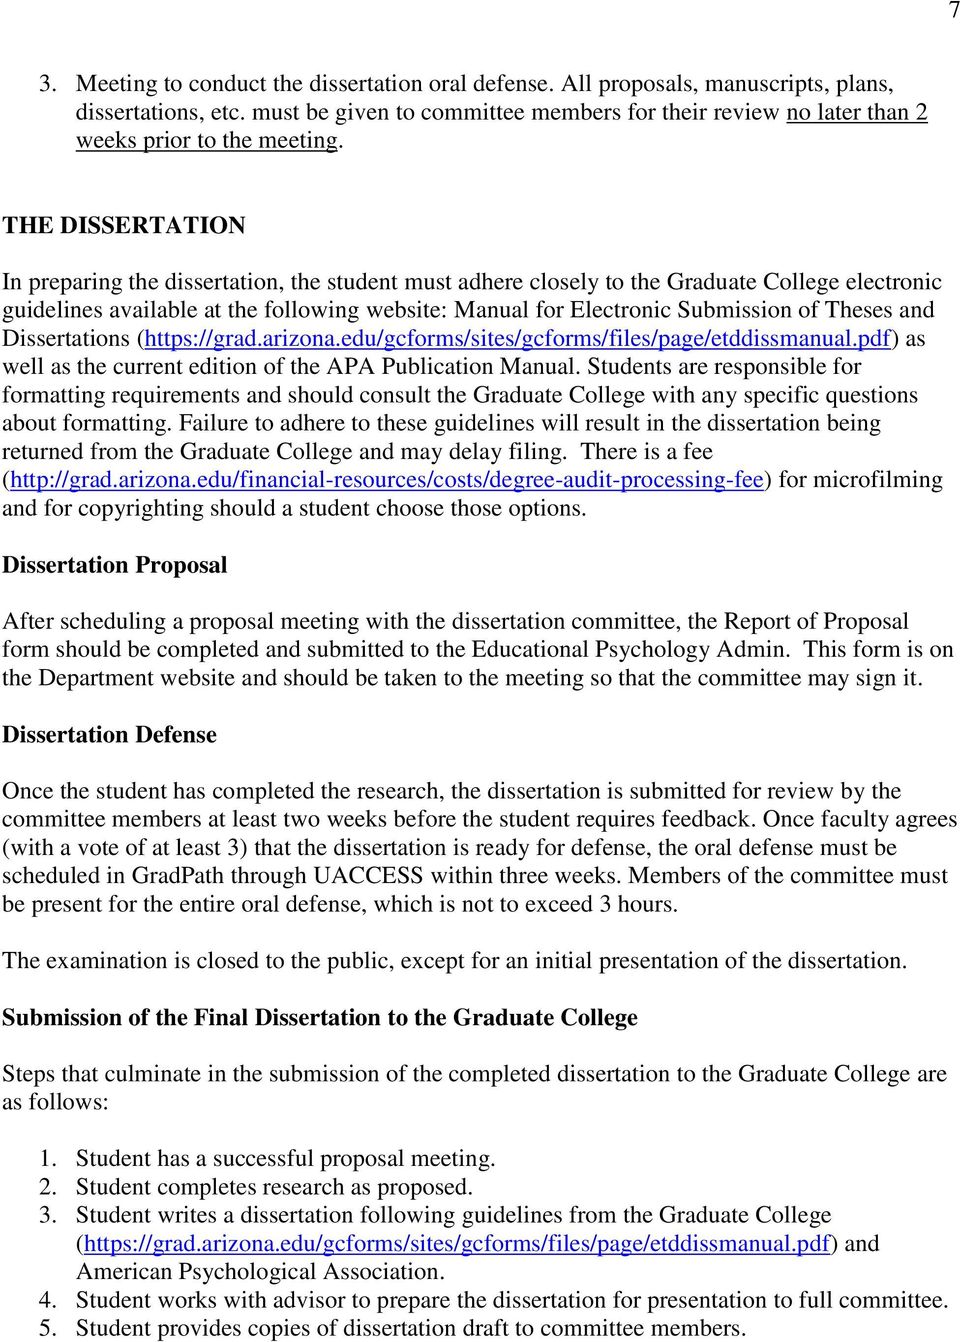 THE DISSERTATION In preparing the dissertation, the student must adhere closely to the Graduate College electronic guidelines available at the following website: Manual for Electronic Submission of